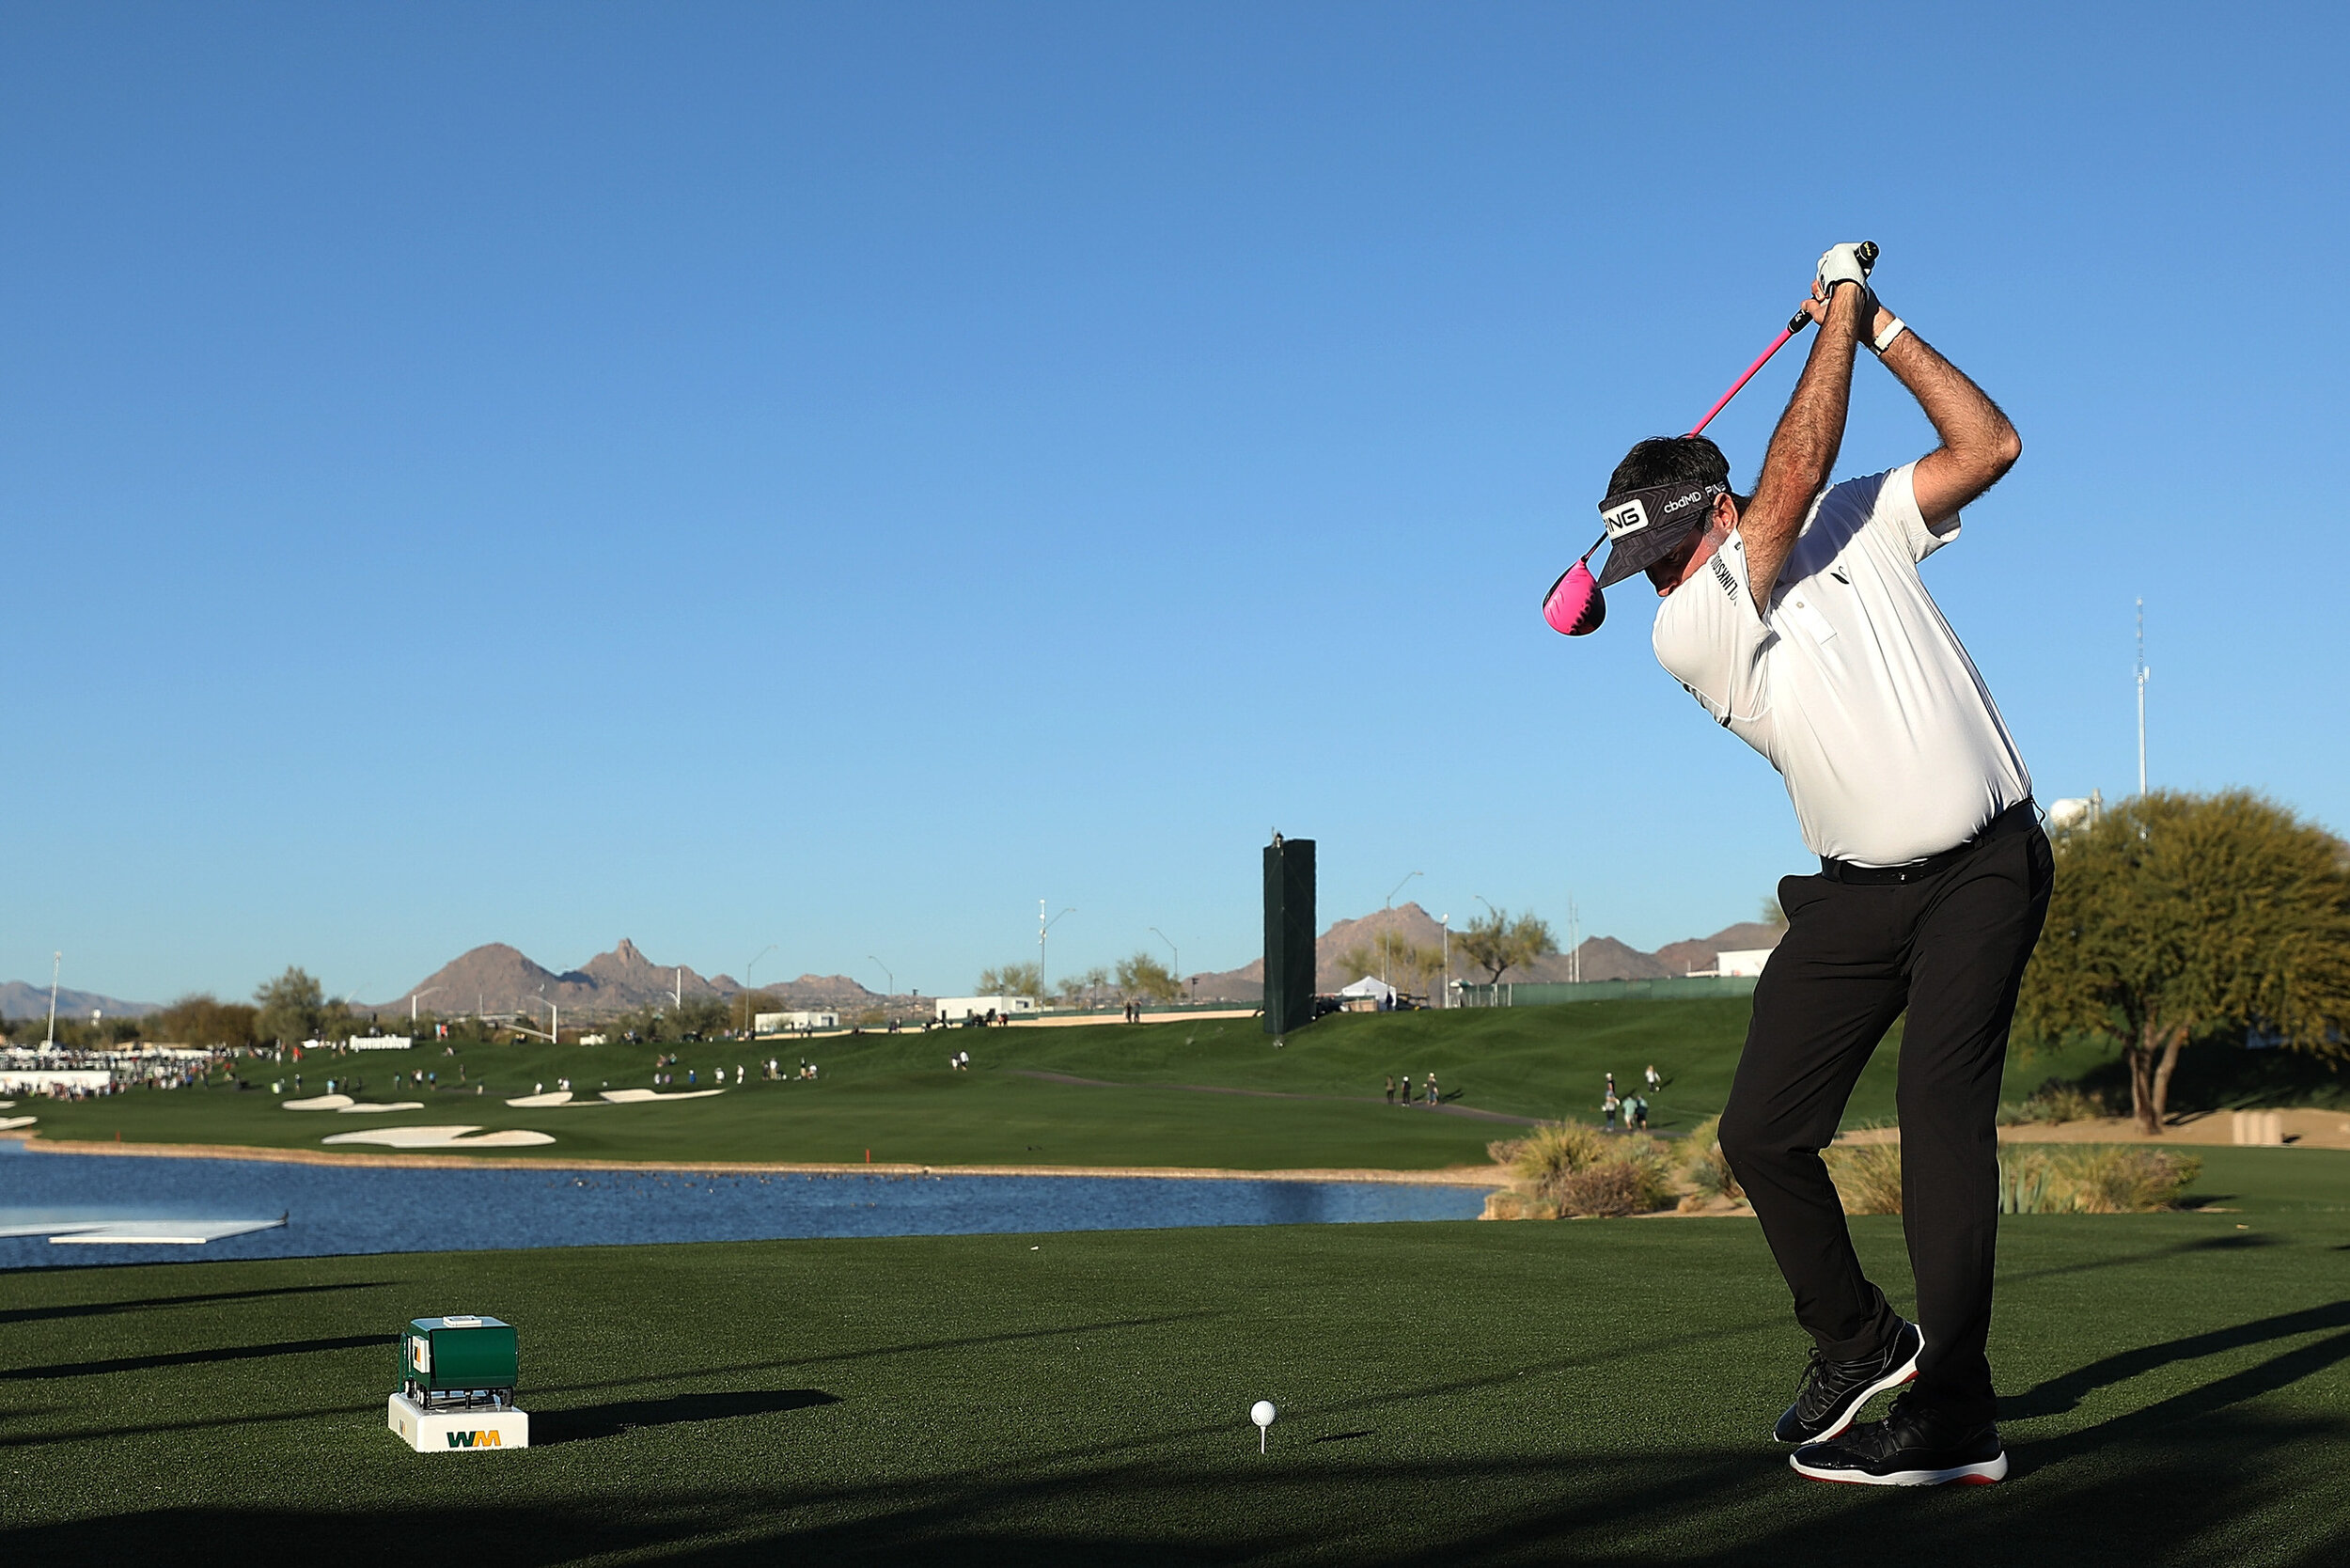  SCOTTSDALE, ARIZONA - FEBRUARY 05: Bubba Watson of the United States hits his tee shot on the 18th hole during the second round of the Waste Management Phoenix Open at TPC Scottsdale on February 05, 2021 in Scottsdale, Arizona. (Photo by Christian P